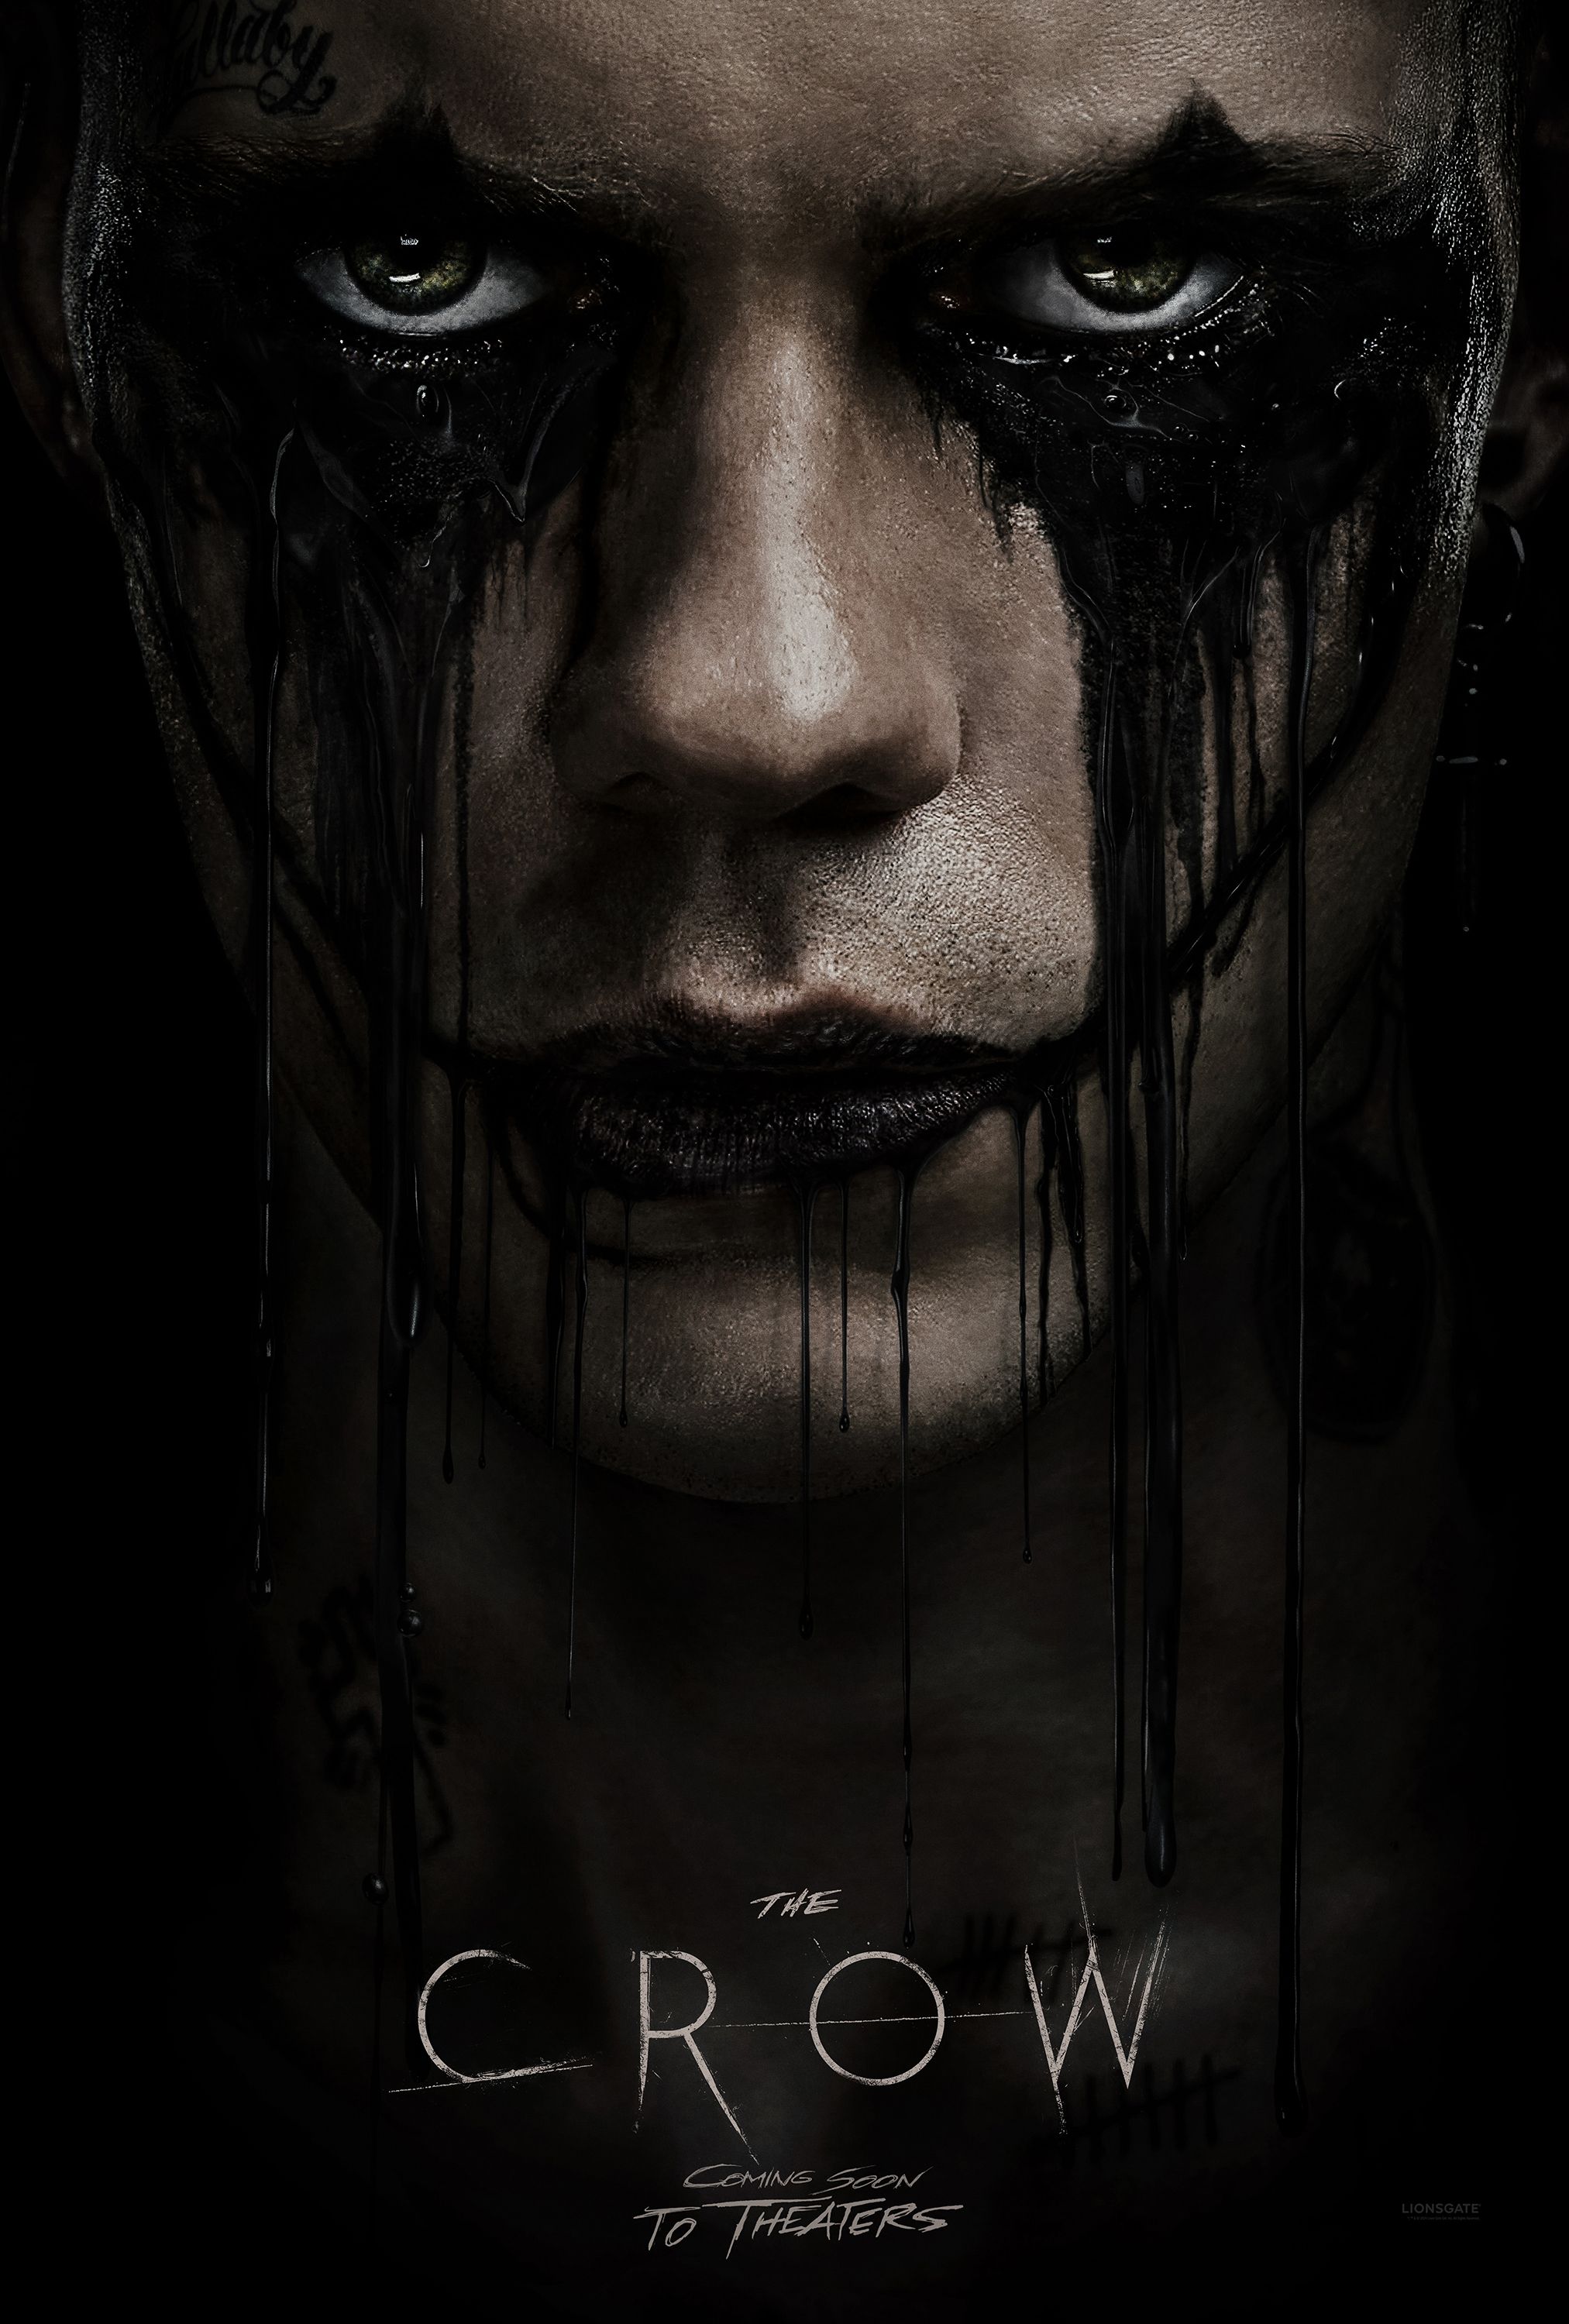 The Crow Reboot Movie Poster Featuring Bill Skarsgard as Eric Draven with Black Paint Dripping Down his Face